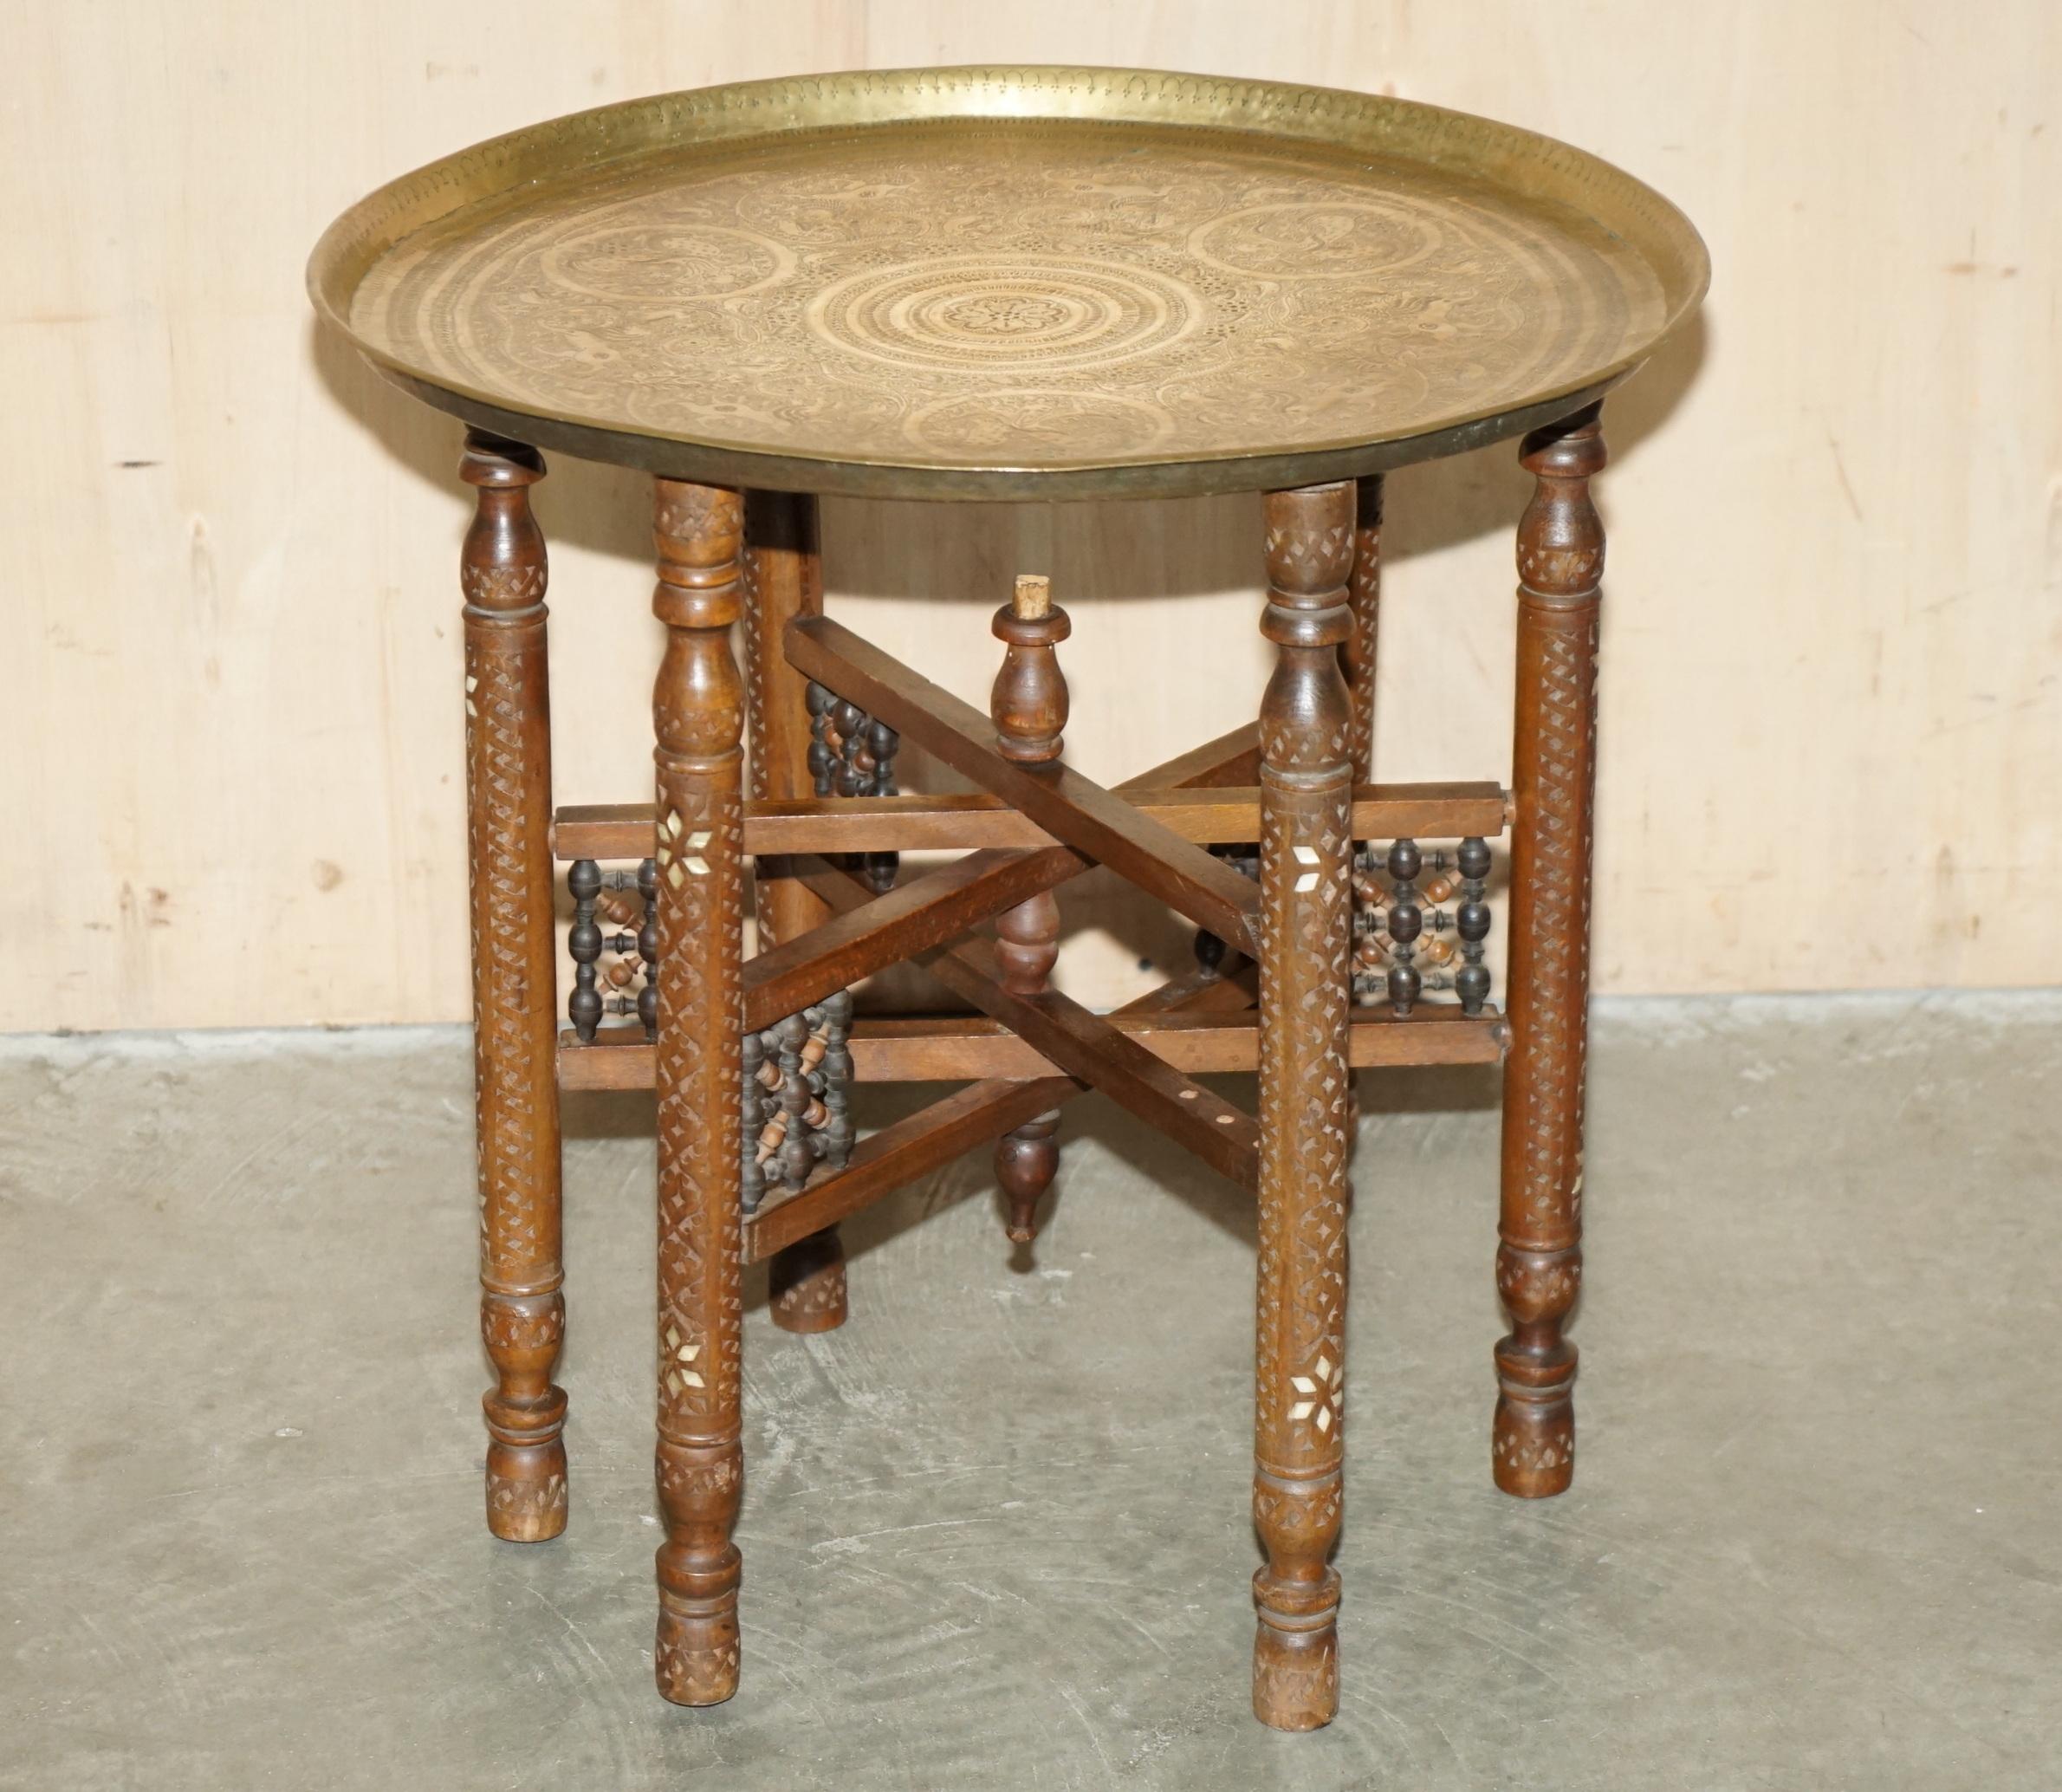 Royal House Antiques

Royal House Antiques is delighted to offer for sale this ornately hand carved Moroccan brass tray table retailed through Liberty's in the 1880-1900's with Zodiac style Leo etchings 

Please note the delivery fee listed is just